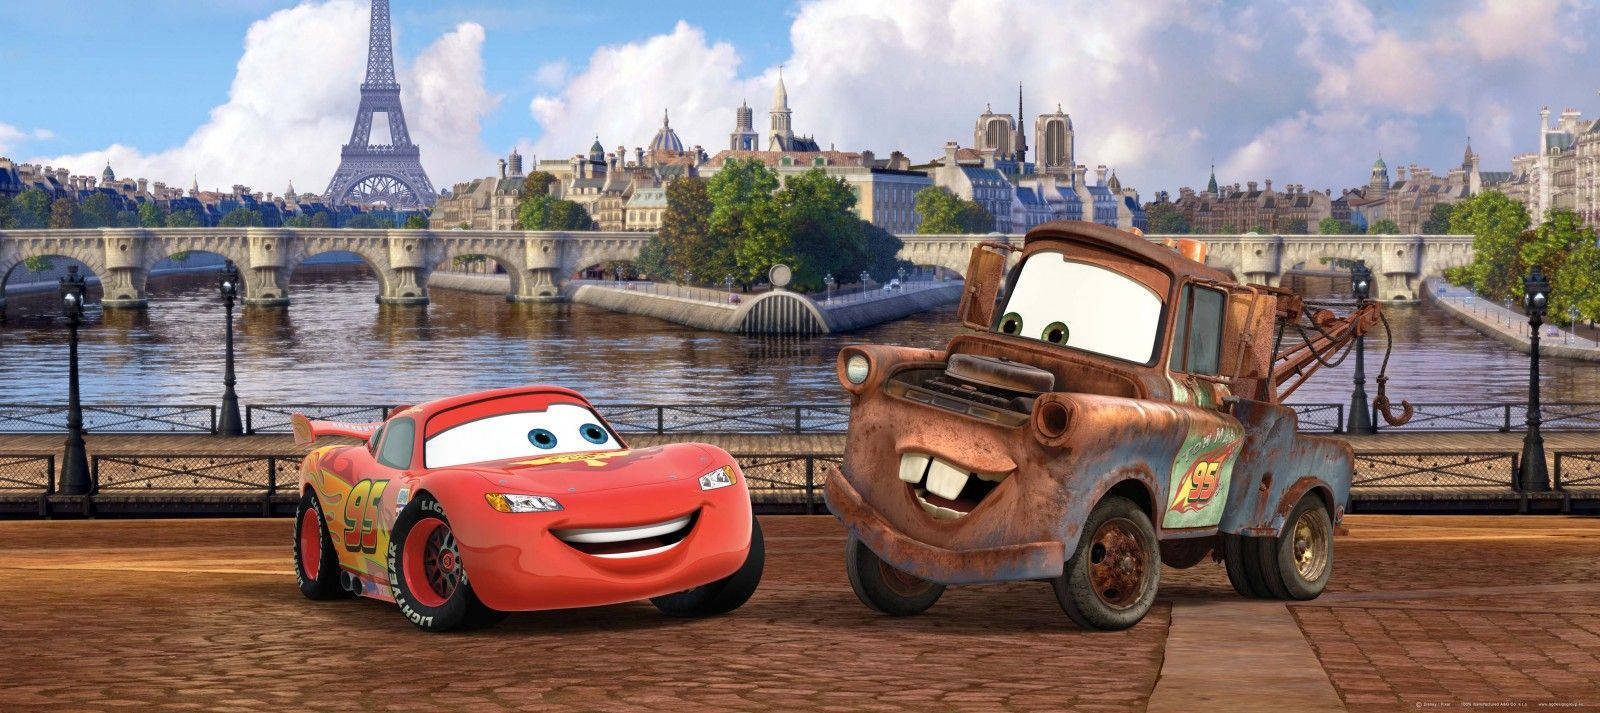 Lightning And Mater In Paris Cars 2 Background